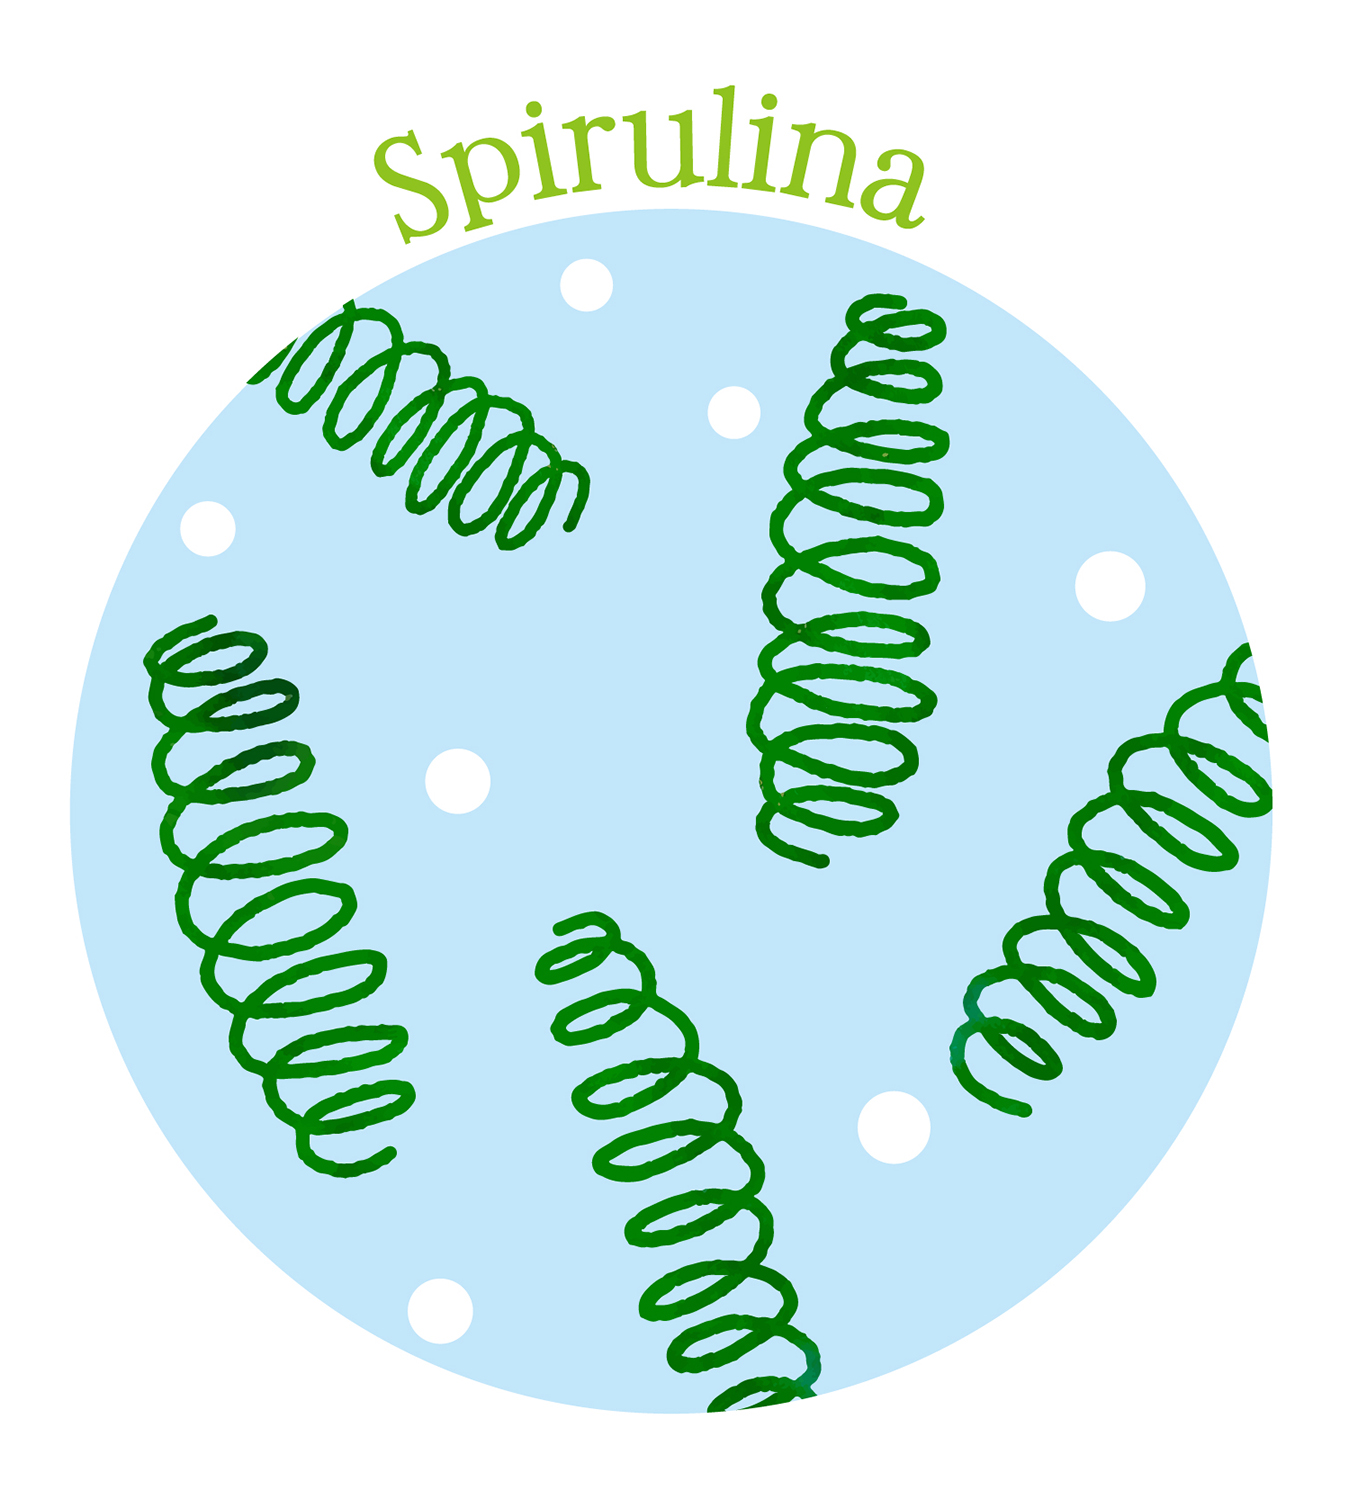 spirulina in the first place